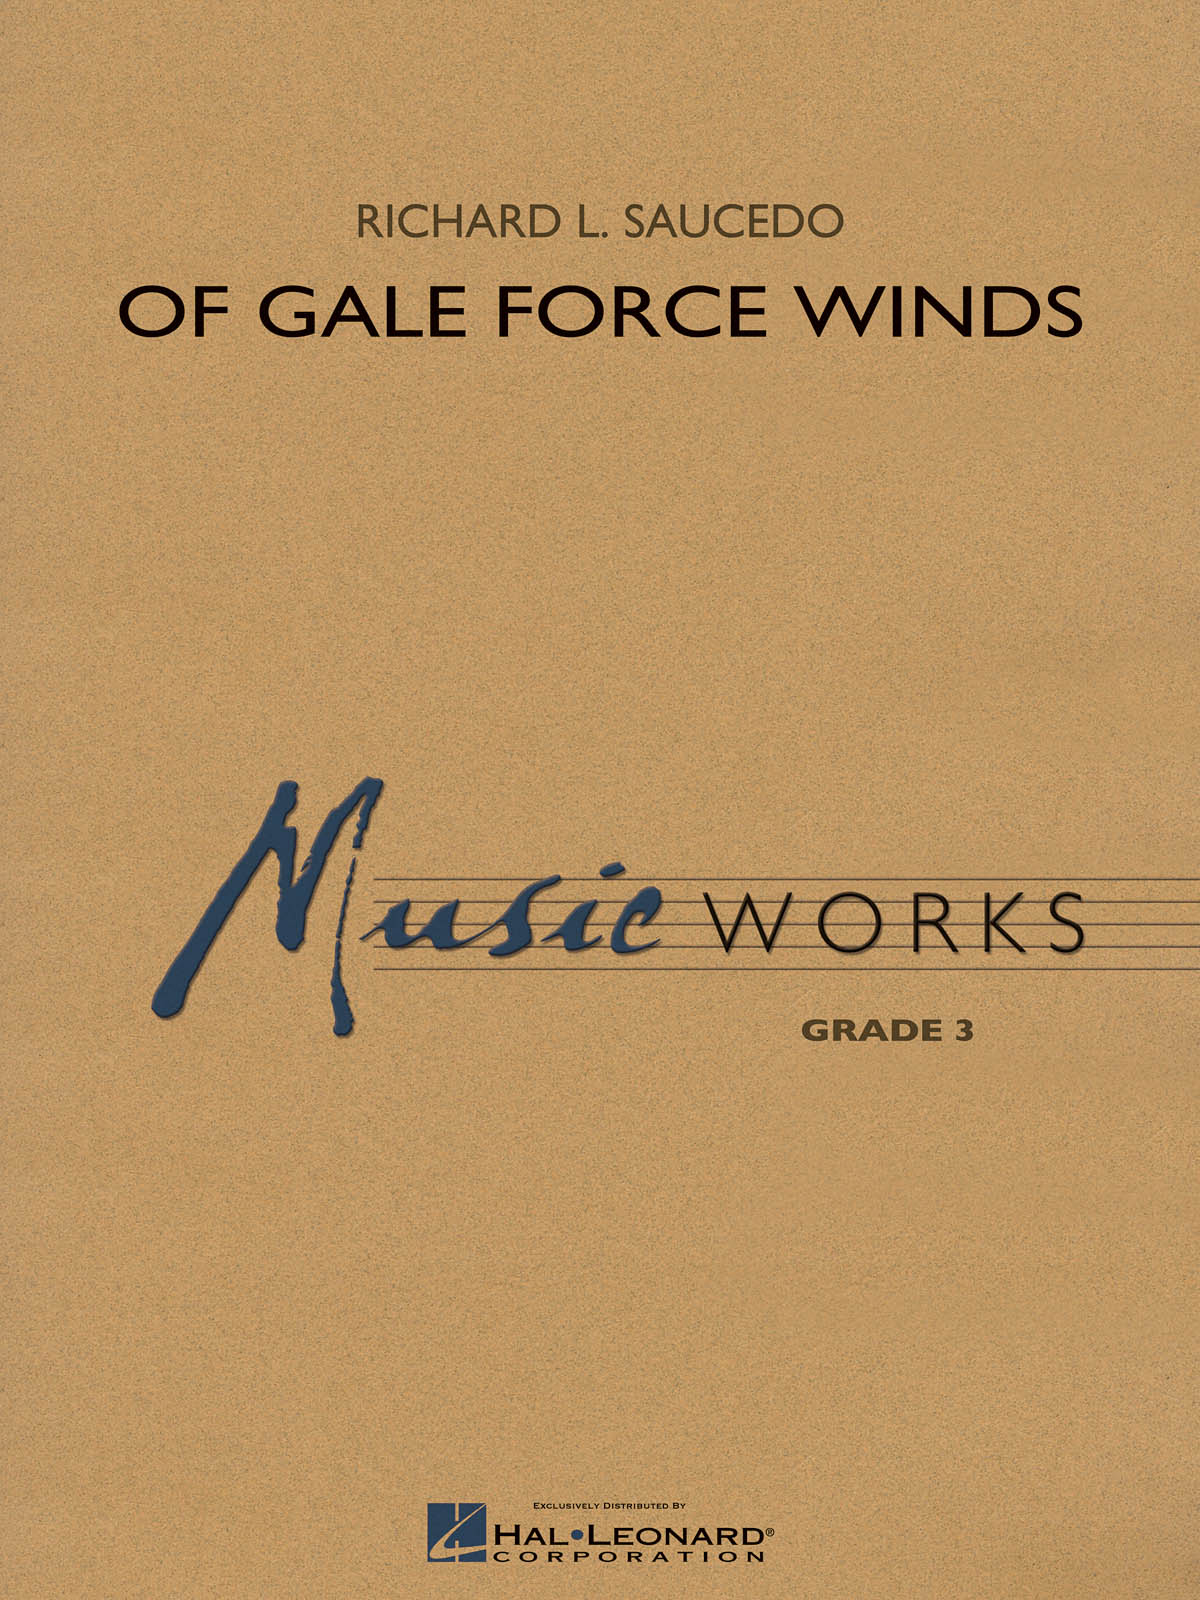 Of Gale fuerce Winds